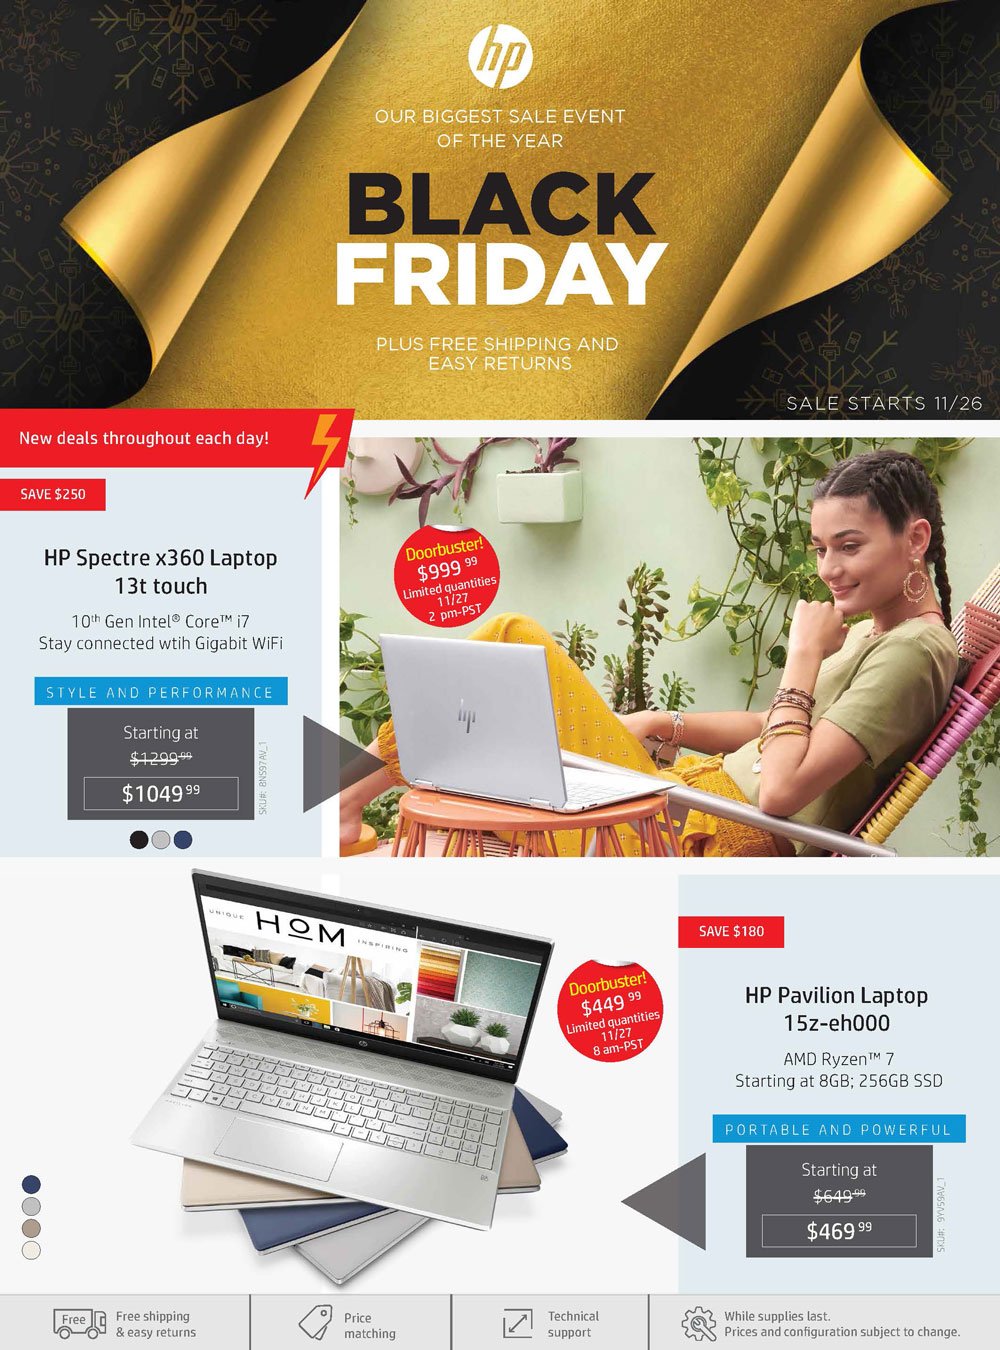 HP Black Friday 2021 Ad - Savings.com - Will Hp Have Deals On Black Friday